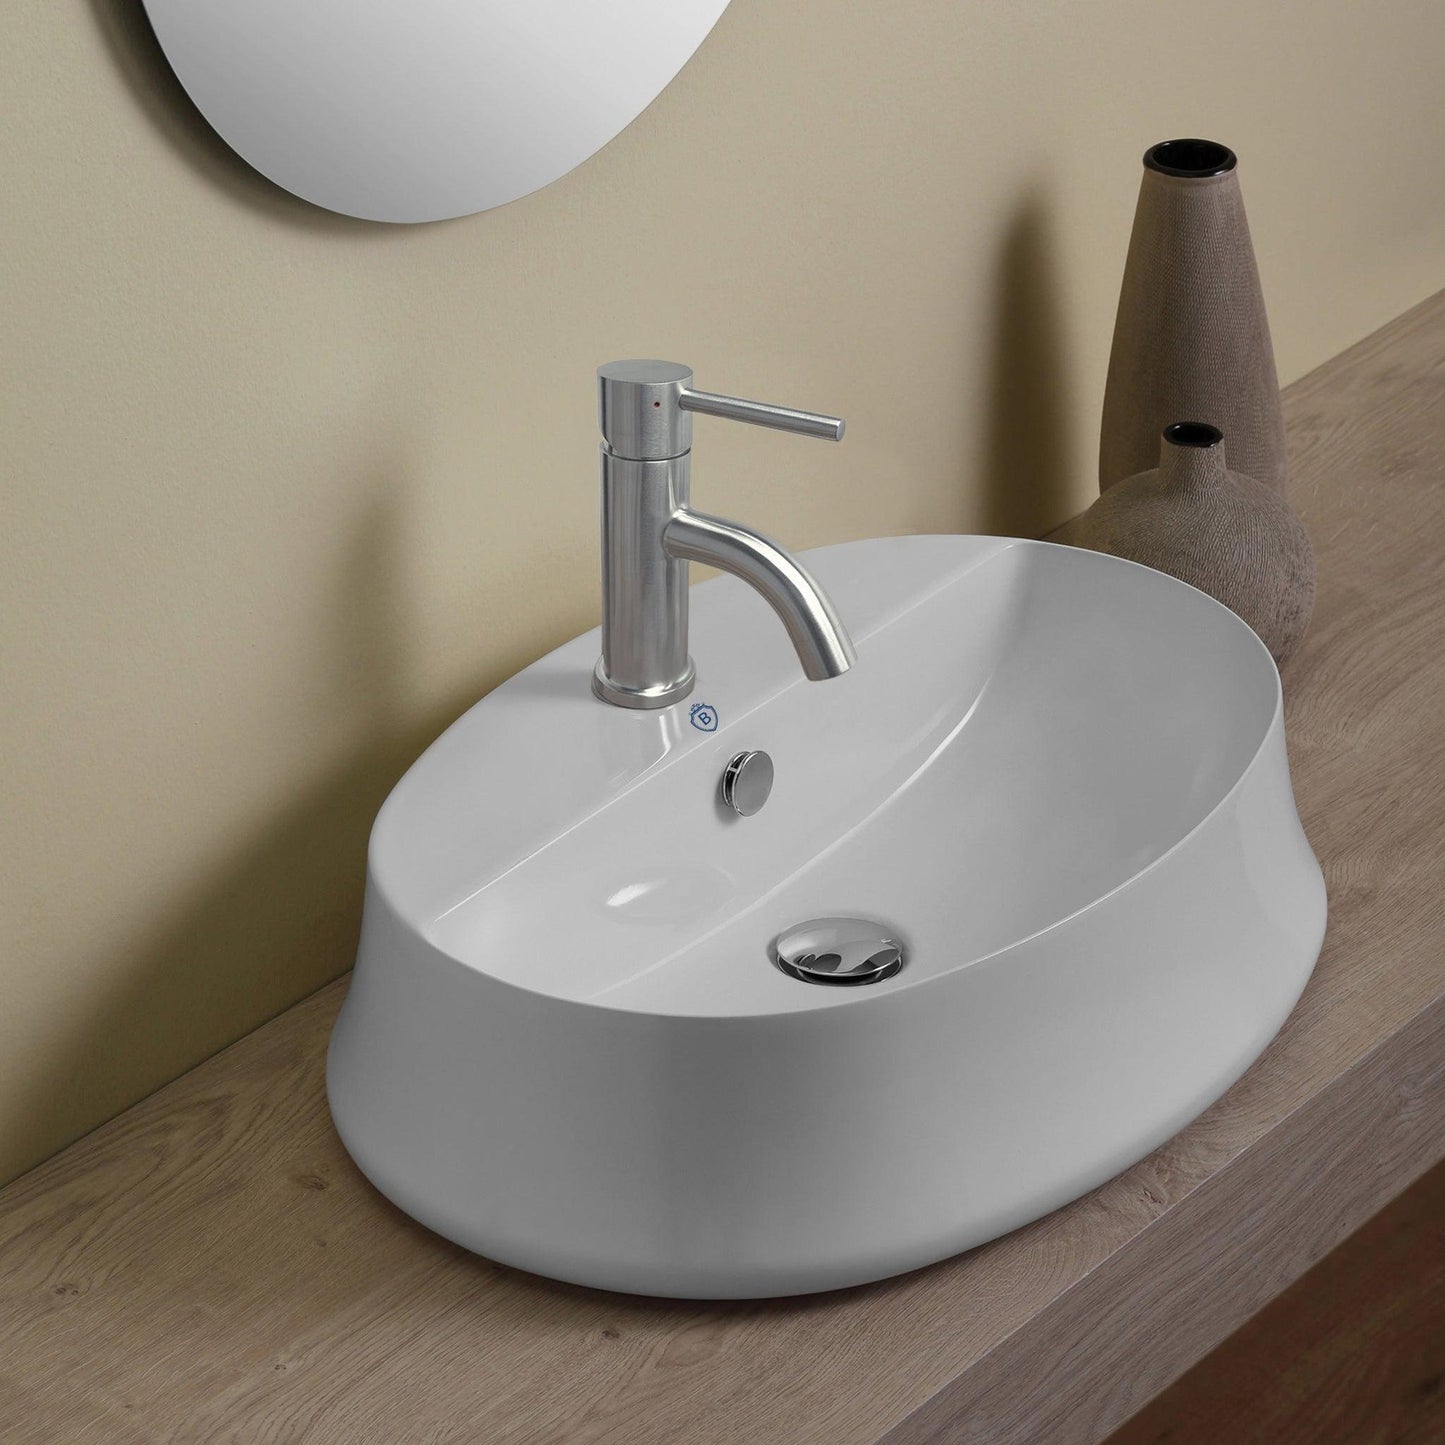 Whitehaus Britannia B-SH05 White Oval Above Mount Basin With Single Faucet Hole Drill With Rear Center Drain